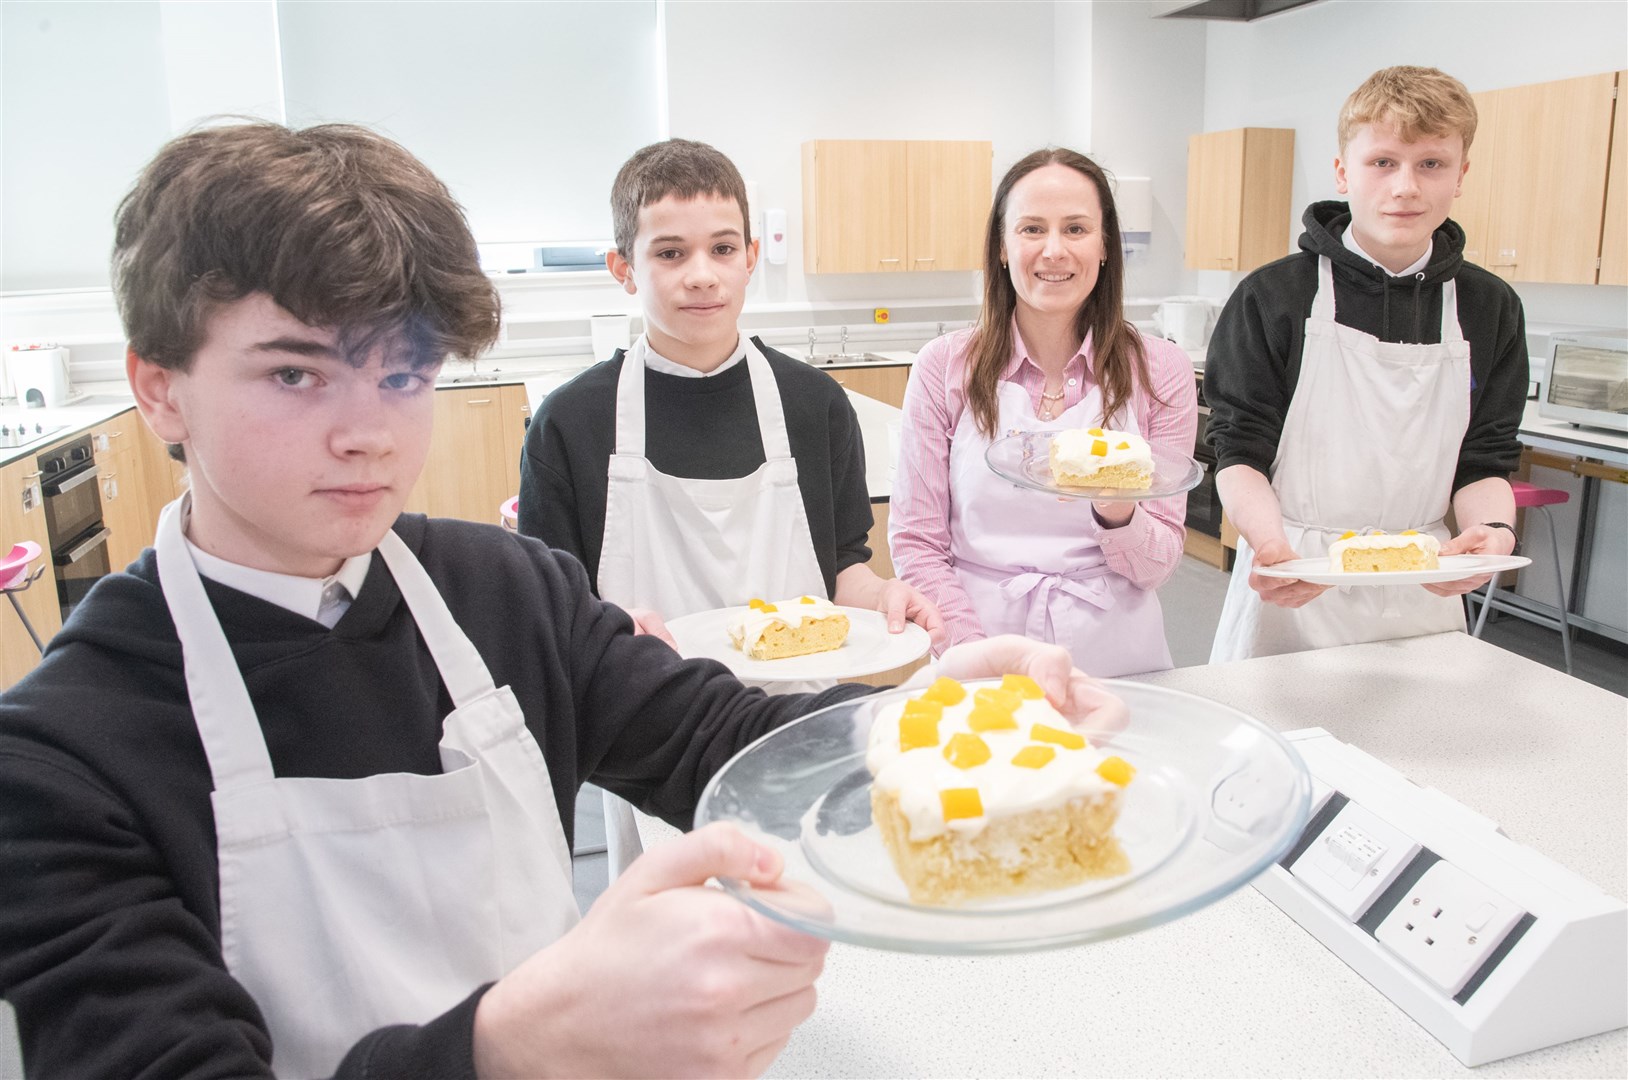 Michael Caton, Hamish Fraser and Cameron Bethell with their 'Made in Moray Mango Three Milk' cake and Katalin Urquhart from Torta. Picture: Daniel Forsyth.